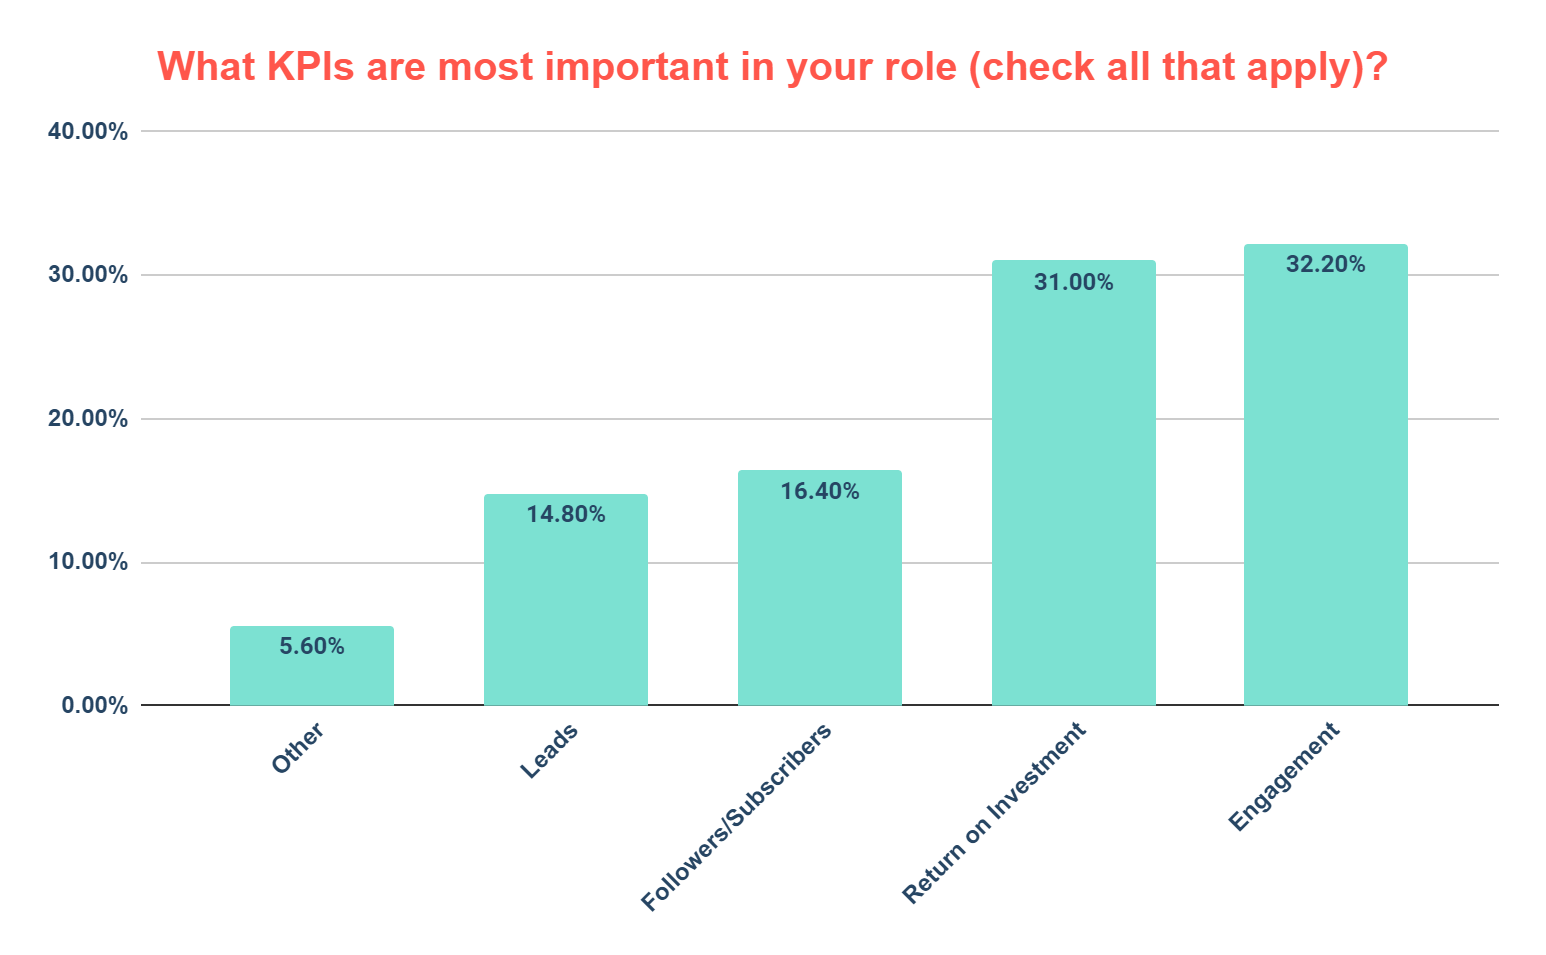 A graphic showing what KPIs are most important in marketers' roles. Results: Engagement: 32.20%, ROI: 31%, Followers/Subscribers 16.40%; Leads: 14.8%; Other: 5.6%